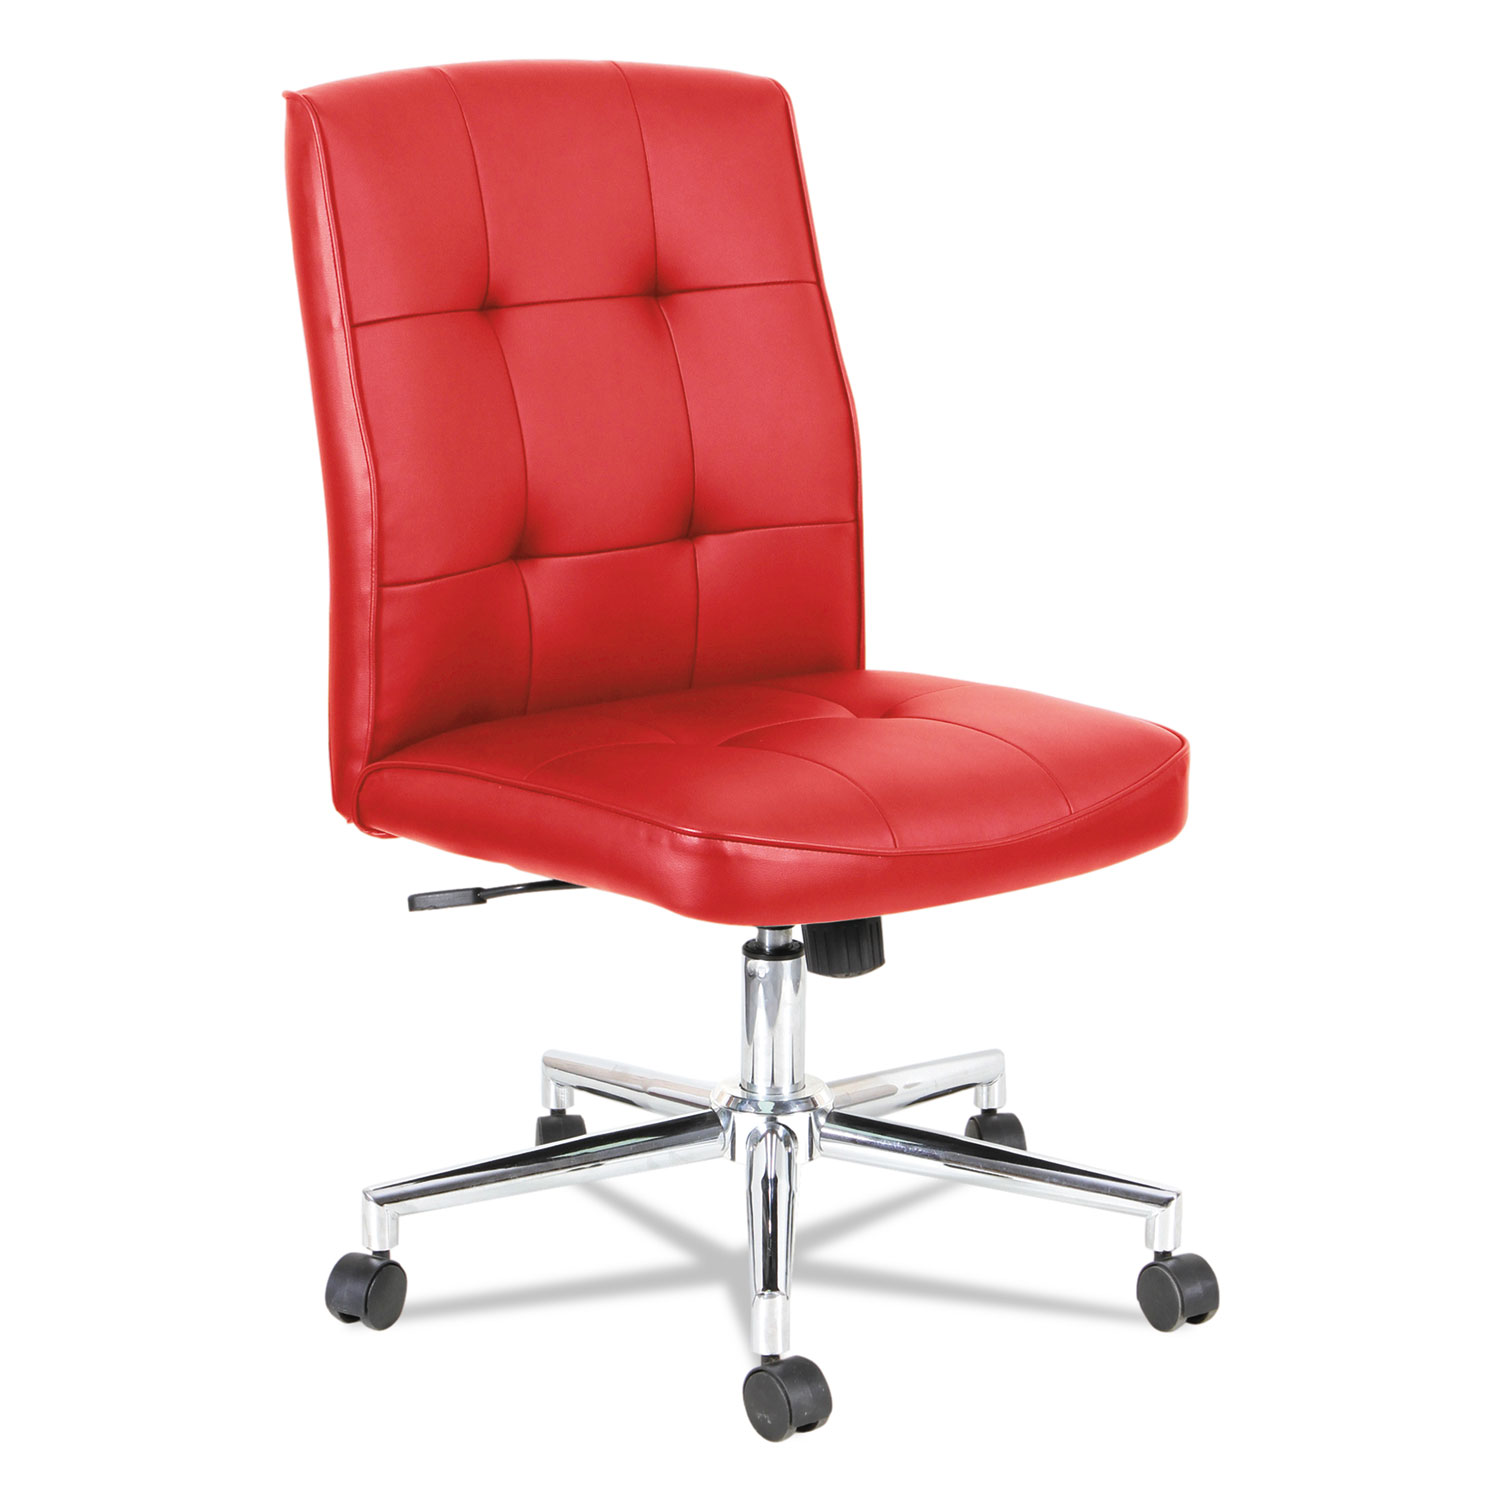  Alera OIFNT4936 Slimline Swivel/Tilt Task Chair, Supports up to 275 lbs., Red Seat/Red Back, Chrome Base (ALENT4936) 